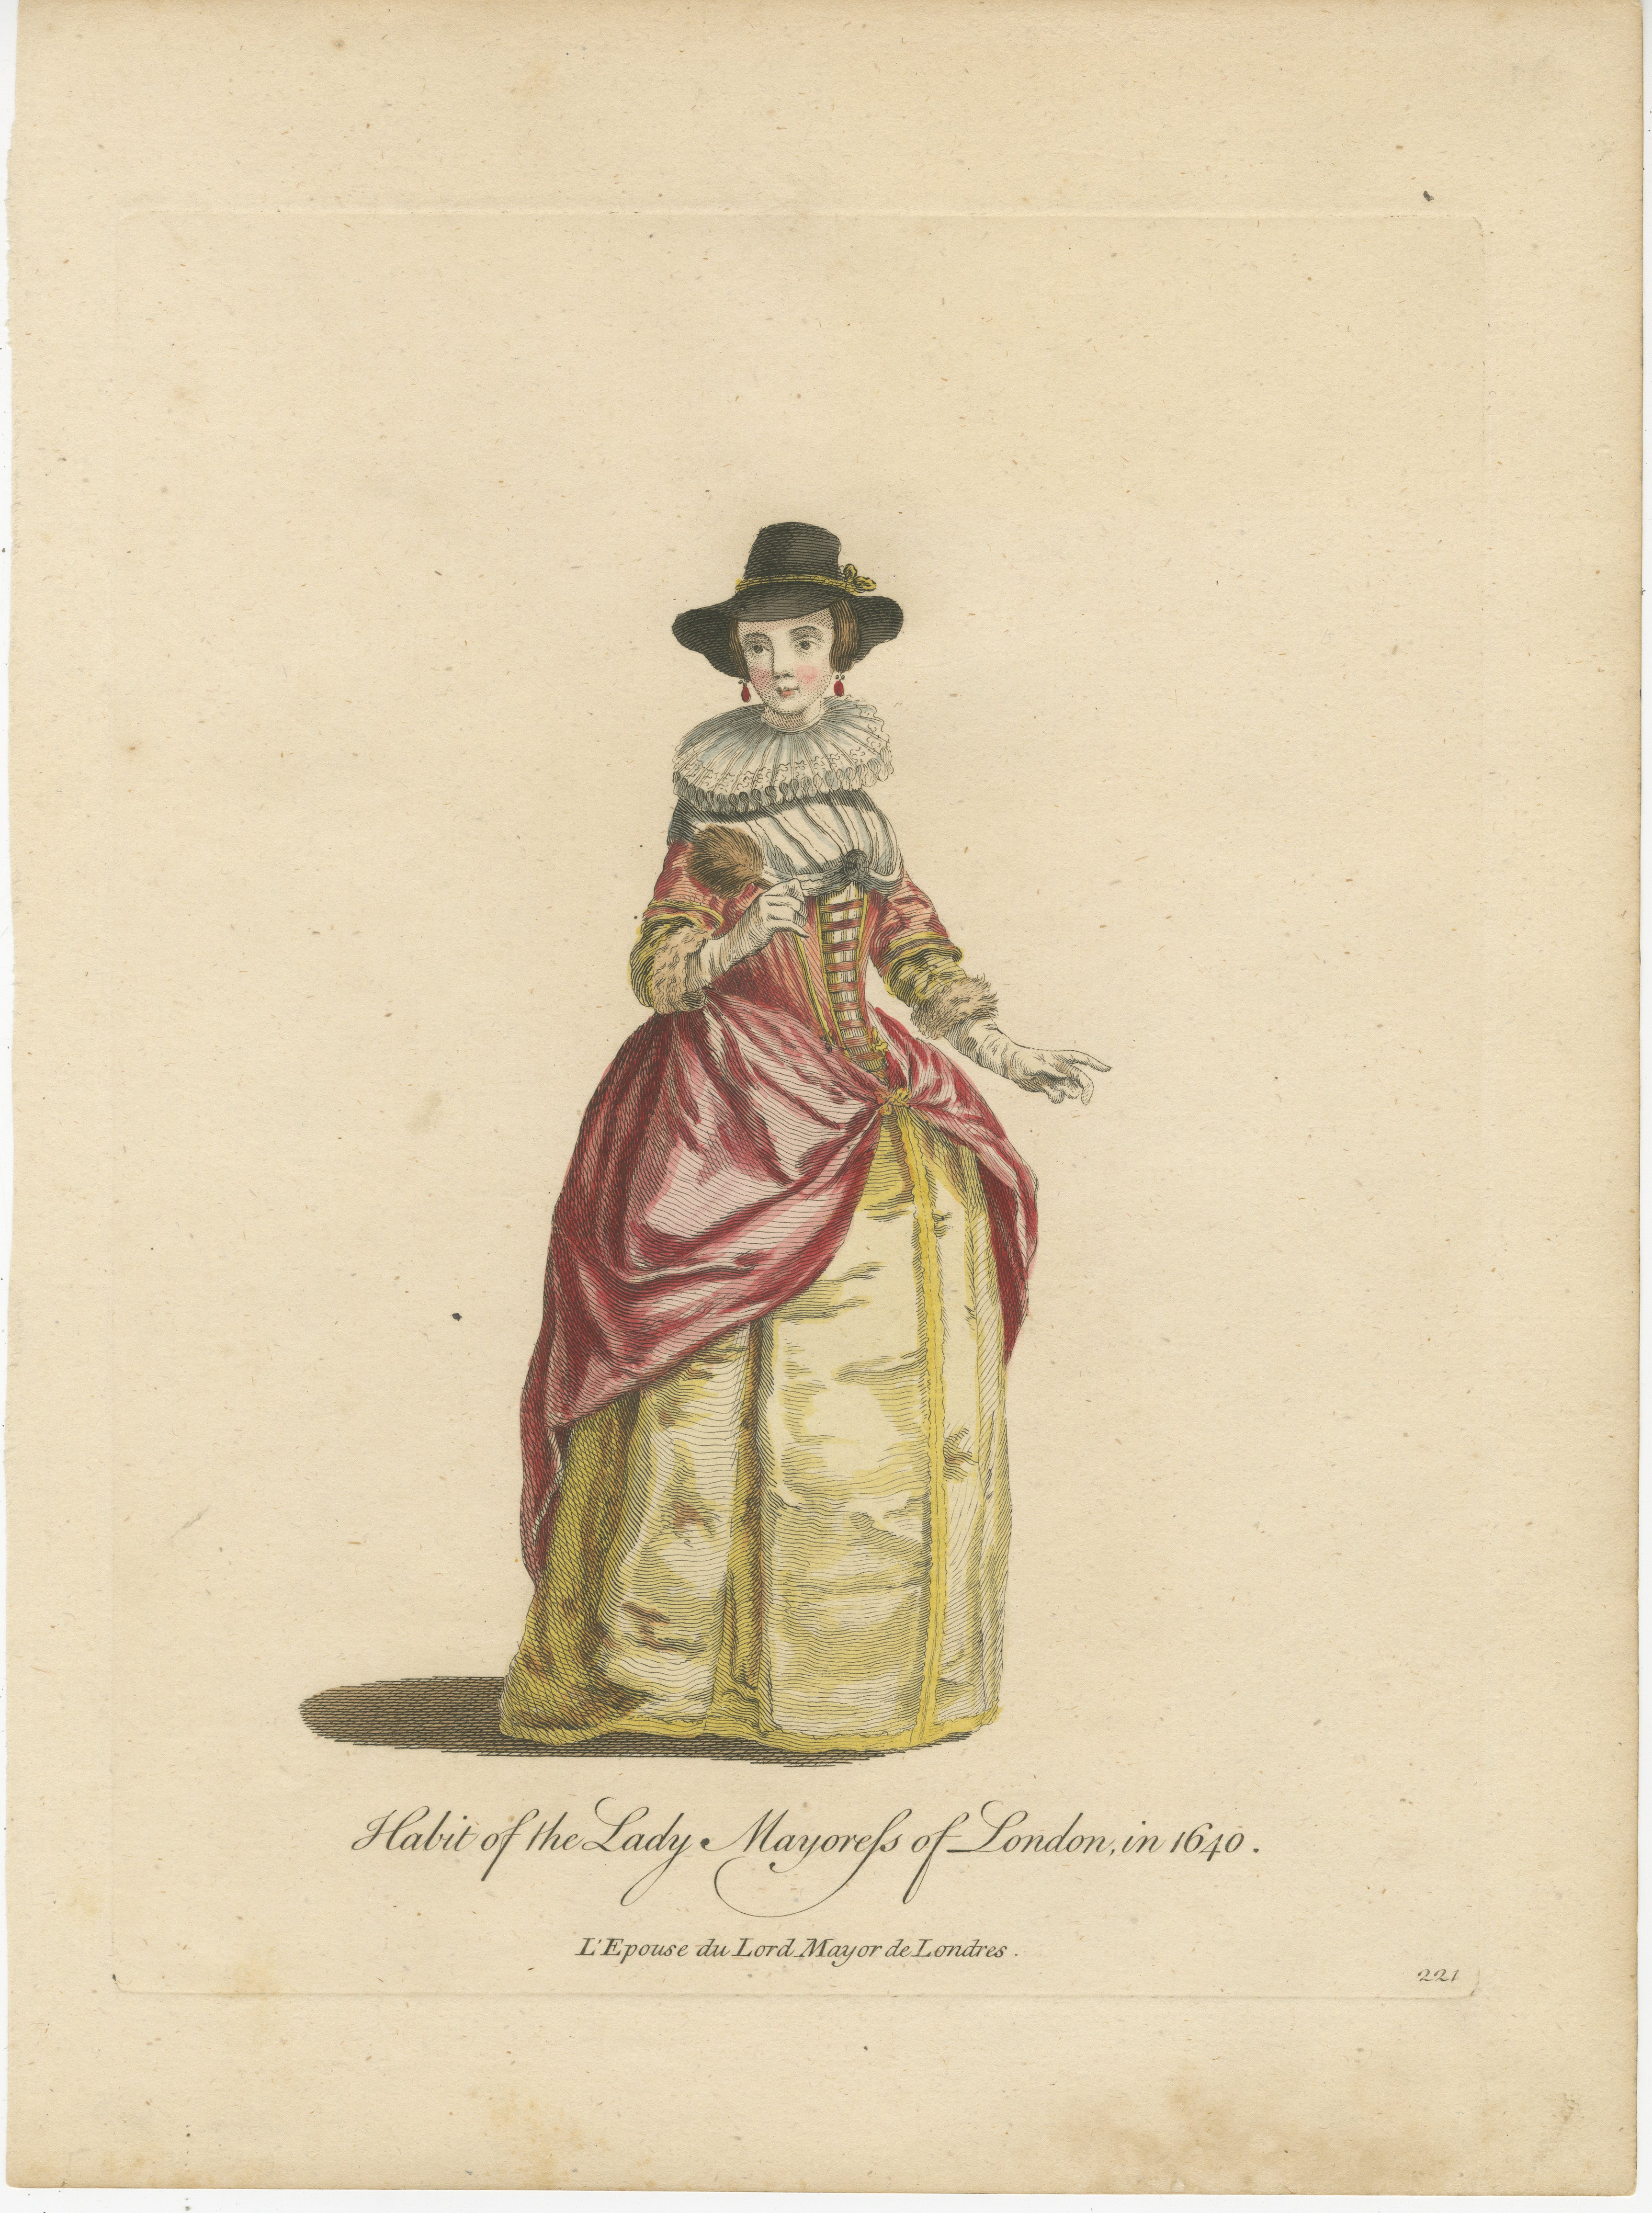 This is a hand-colored atnique print, this time depicting the 